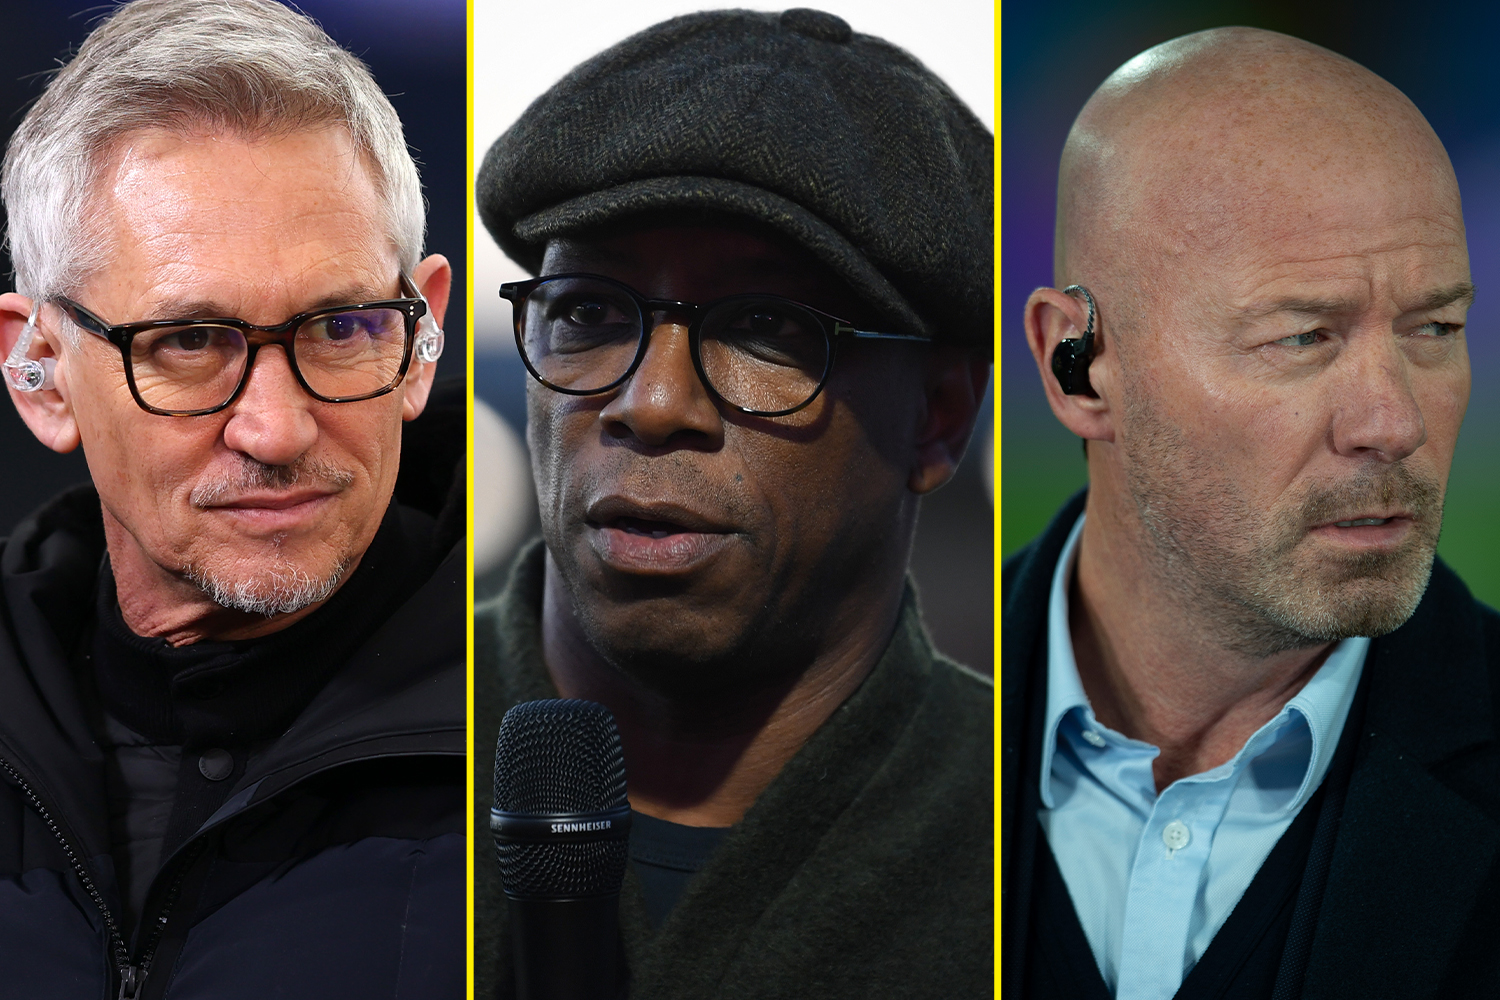 Alan Shearer joins Ian Wright in BBC boycott as Gary Lineker removed from presenting Match of the Day